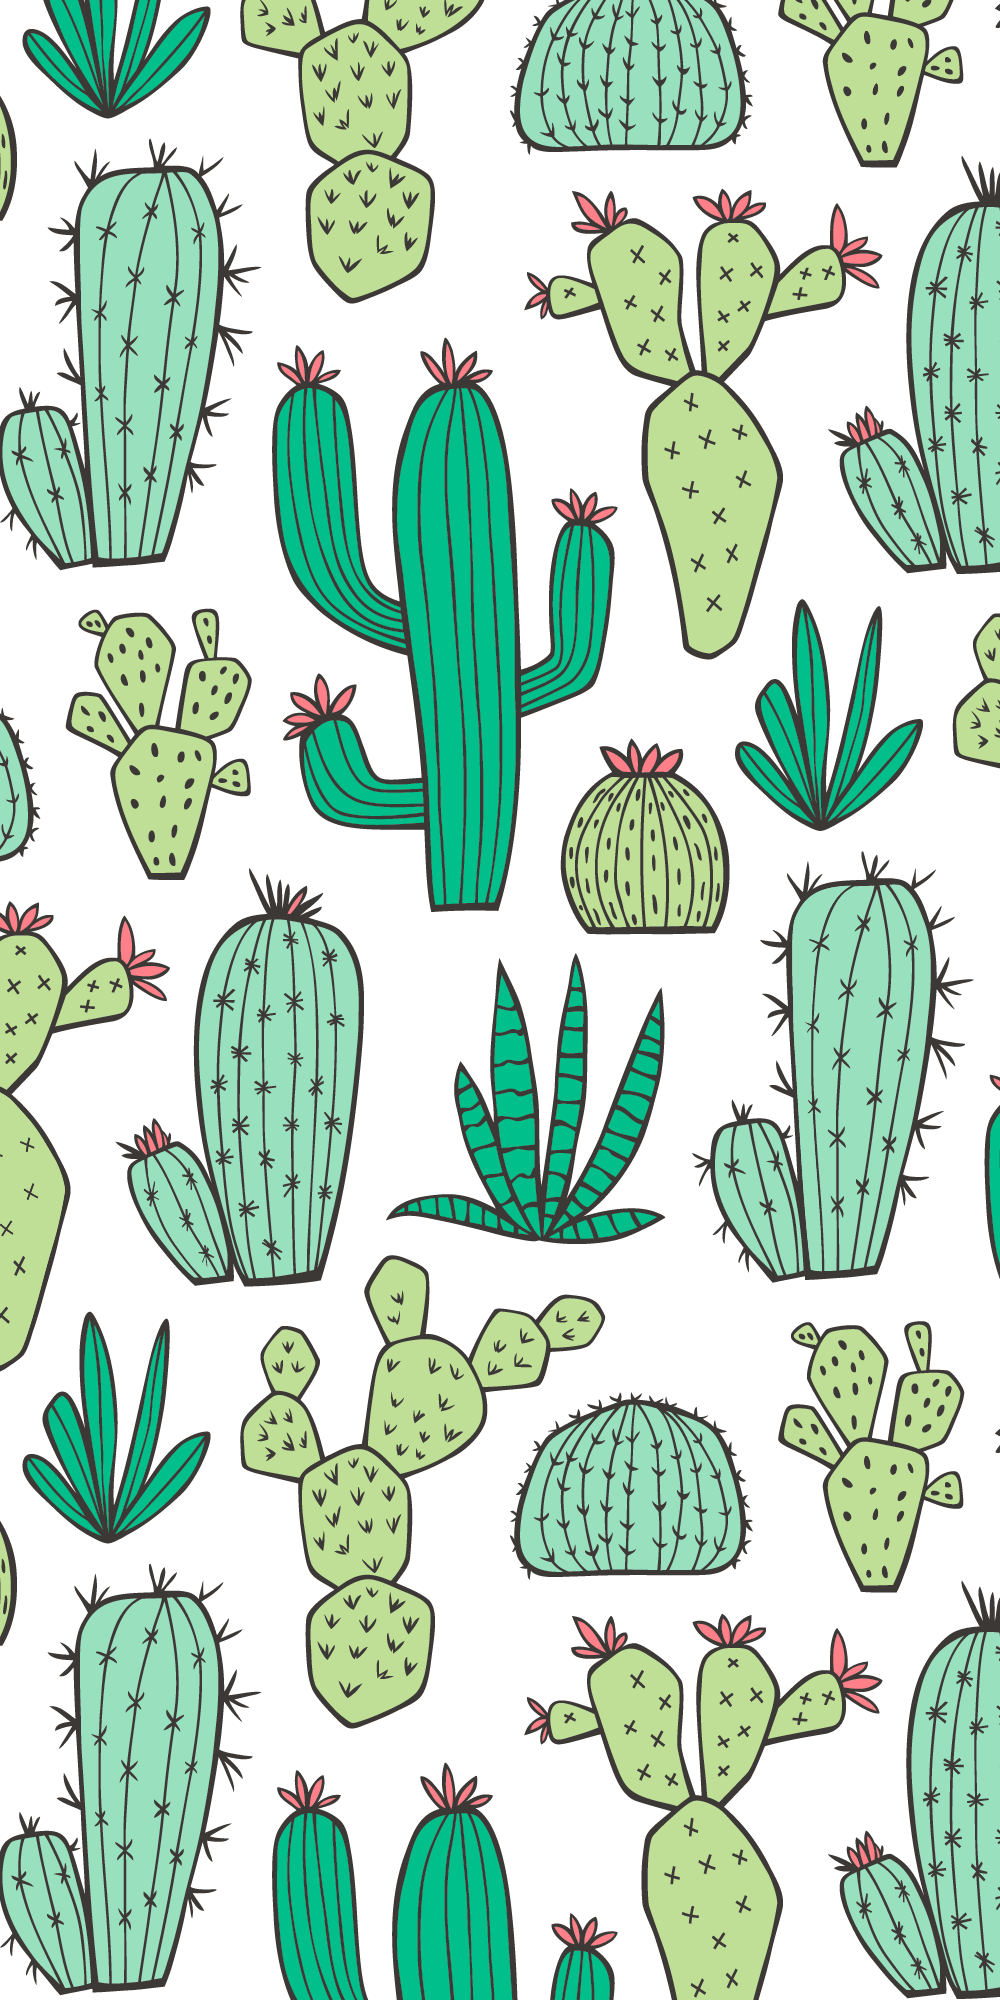 A green and blue cactus pattern on a dark green background - Cactus